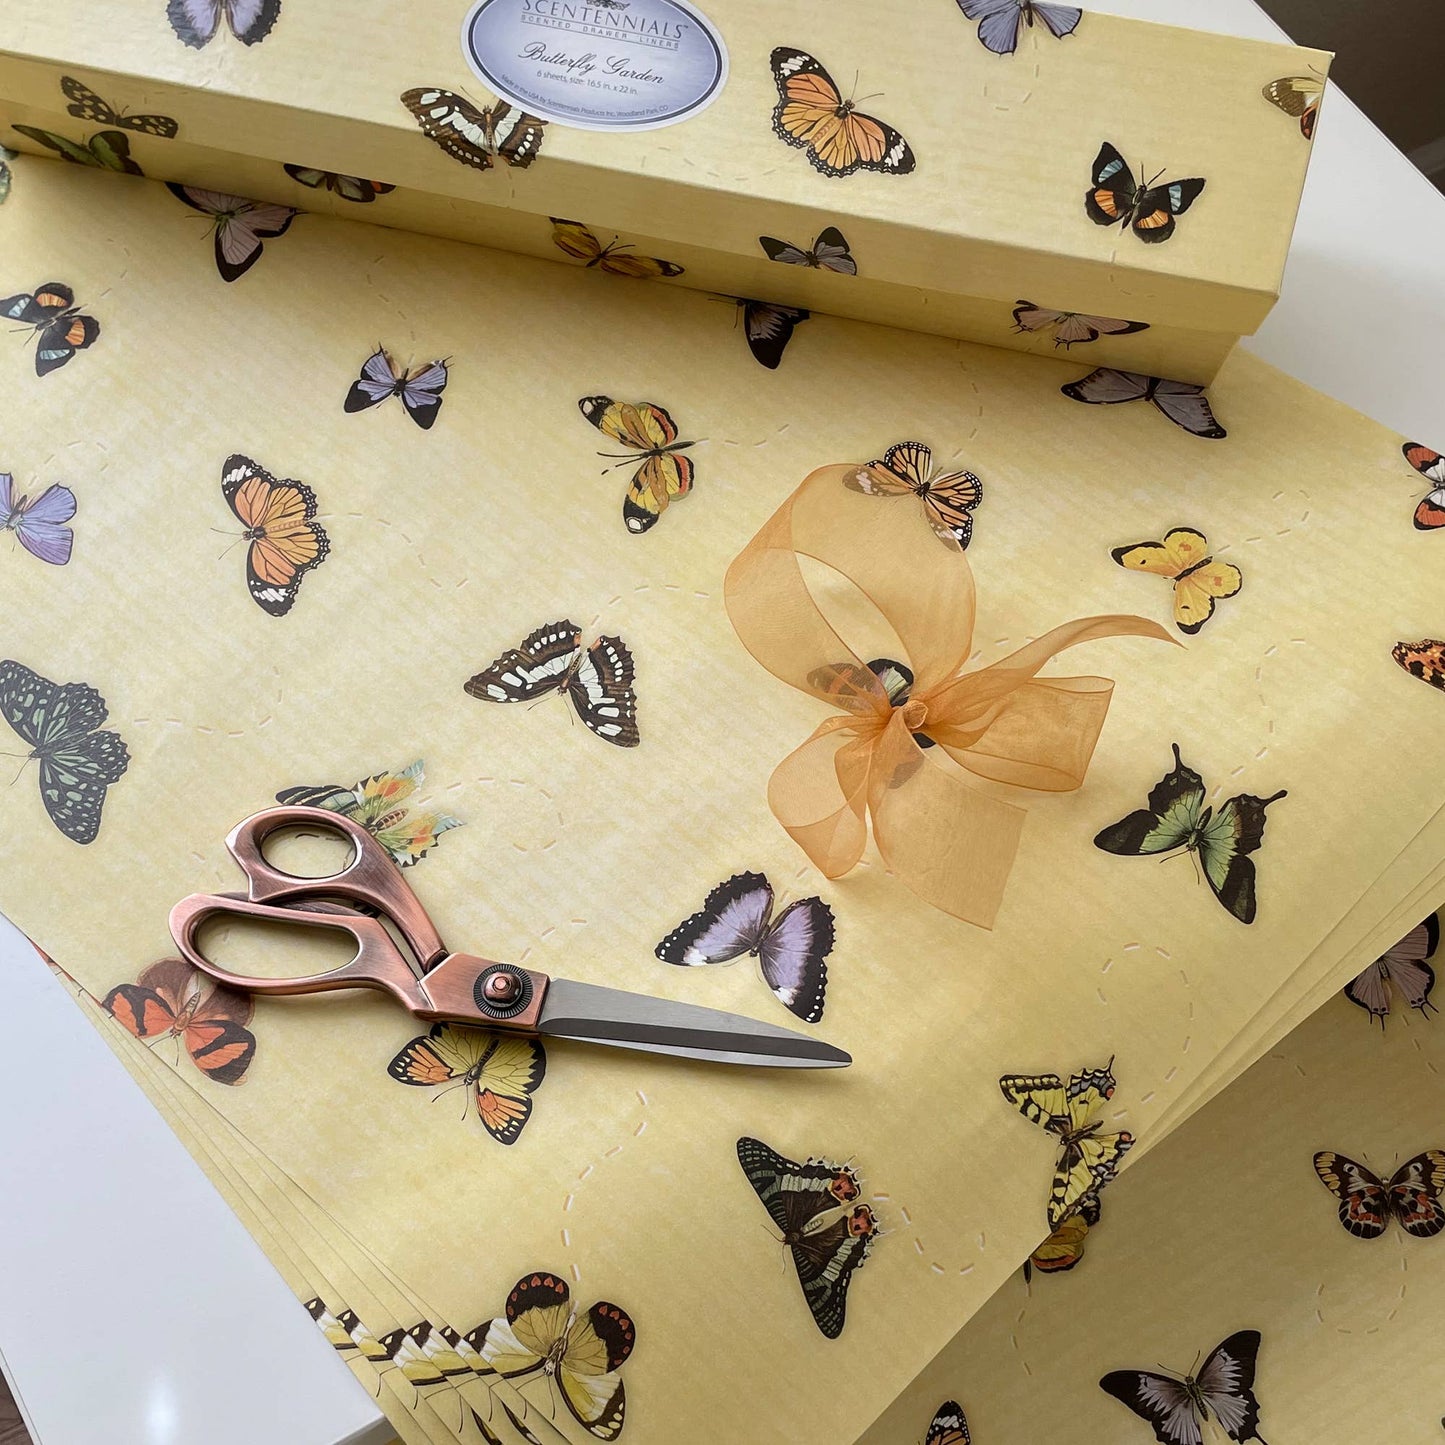 Scentennials Products - Butterfly Garden Scented Drawer Liners